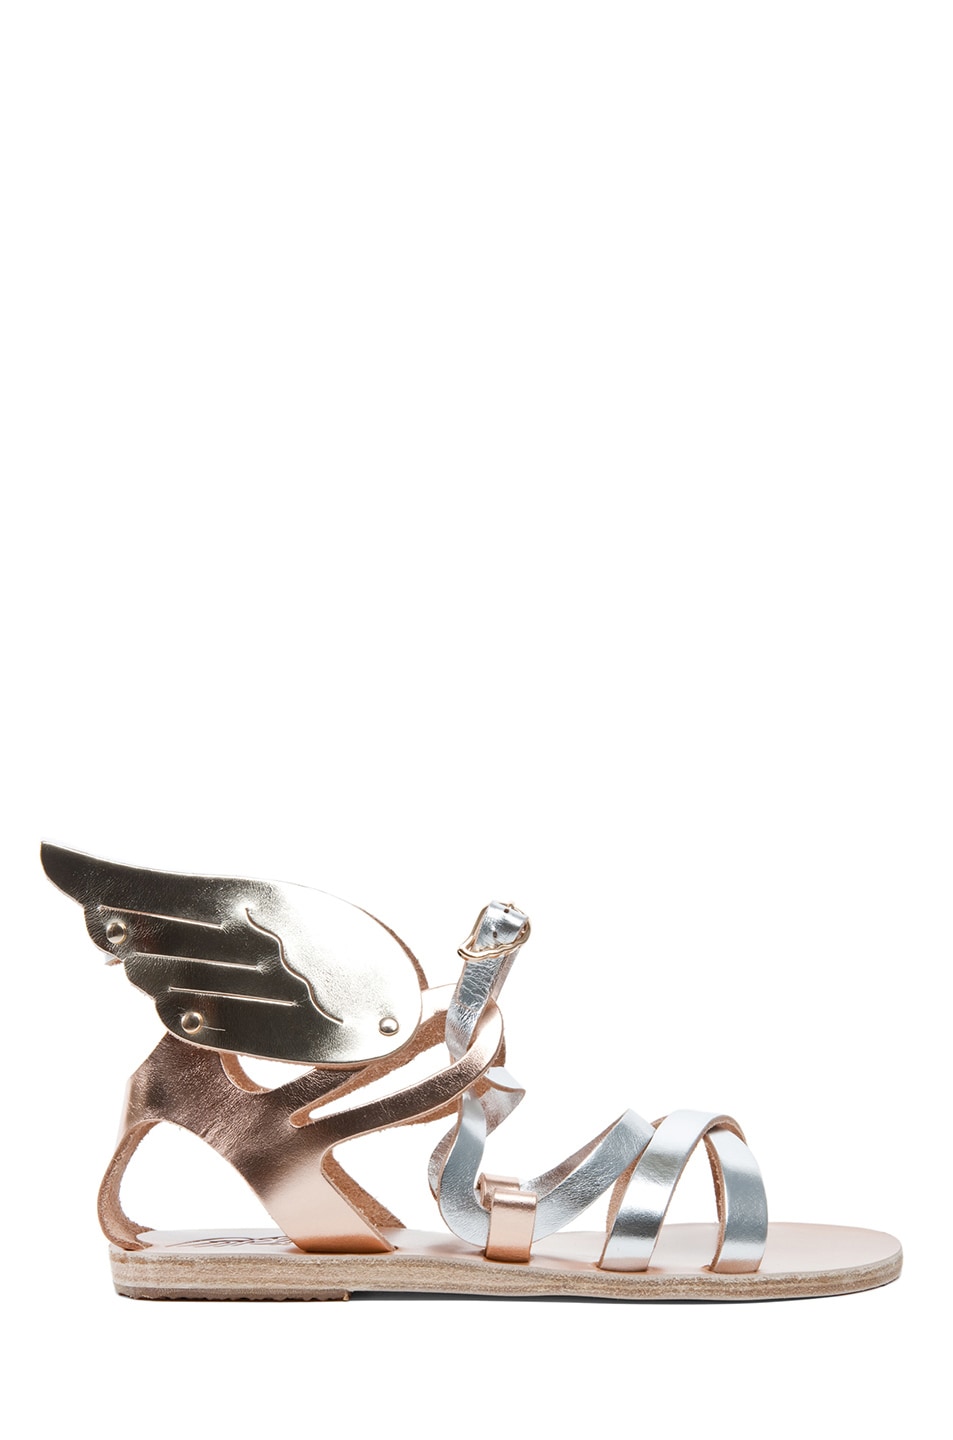 Image 1 of Ancient Greek Sandals Nephele Calfskin Leather Sandals in Metallic Mix